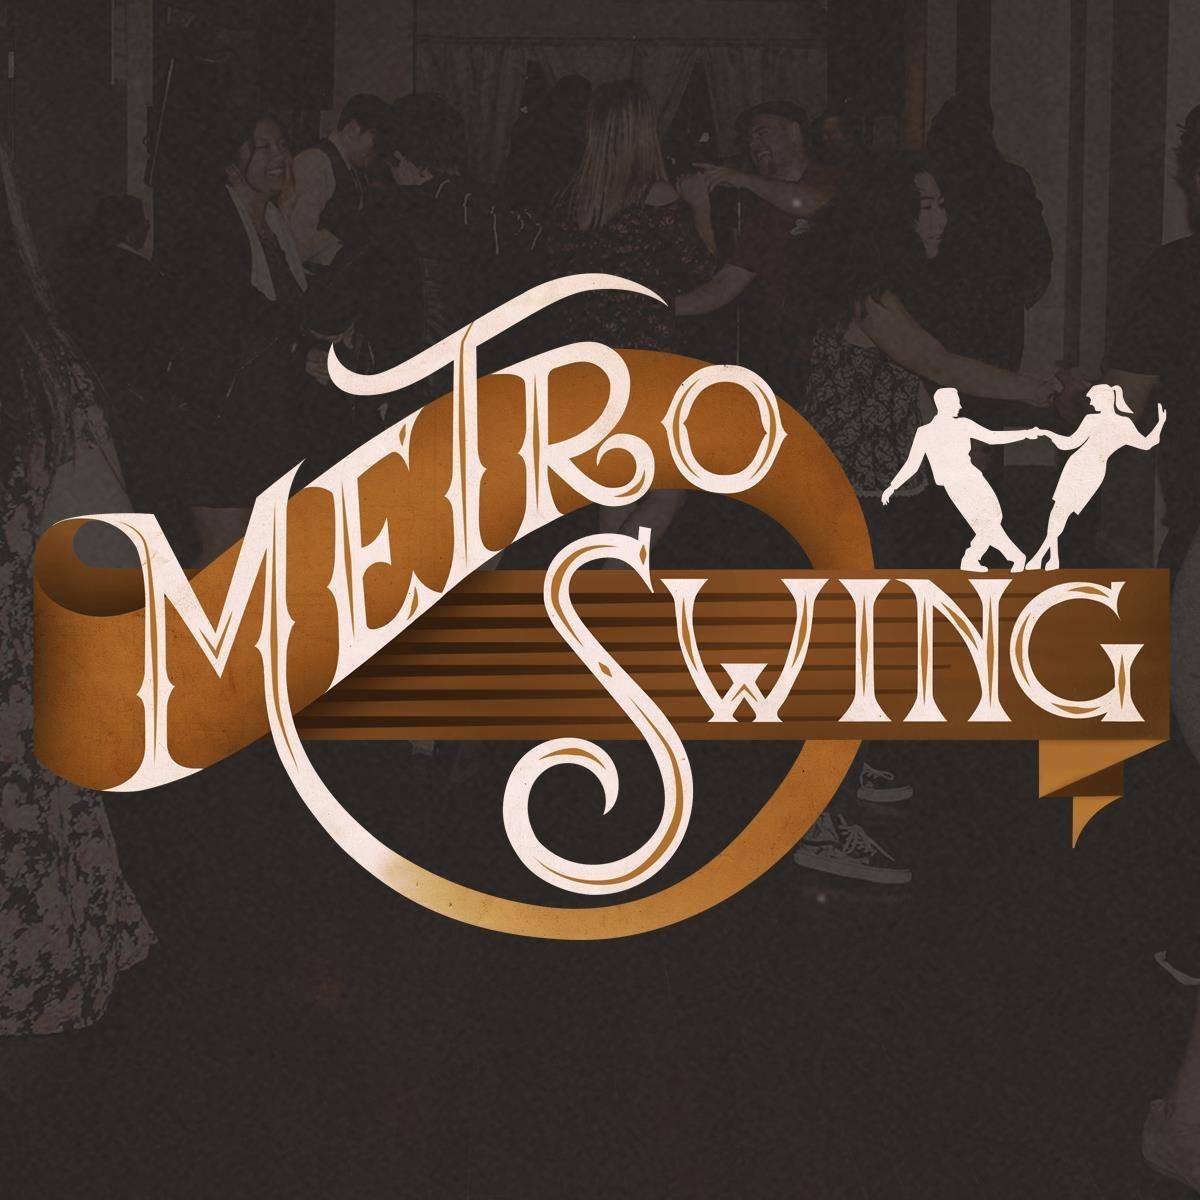 Swing Dancing Every Wednesday!! Join us in Downtown Pomona for some fabulous beginner and intermediate lessons at 7:45p followed by social dancing from 8:30-11p